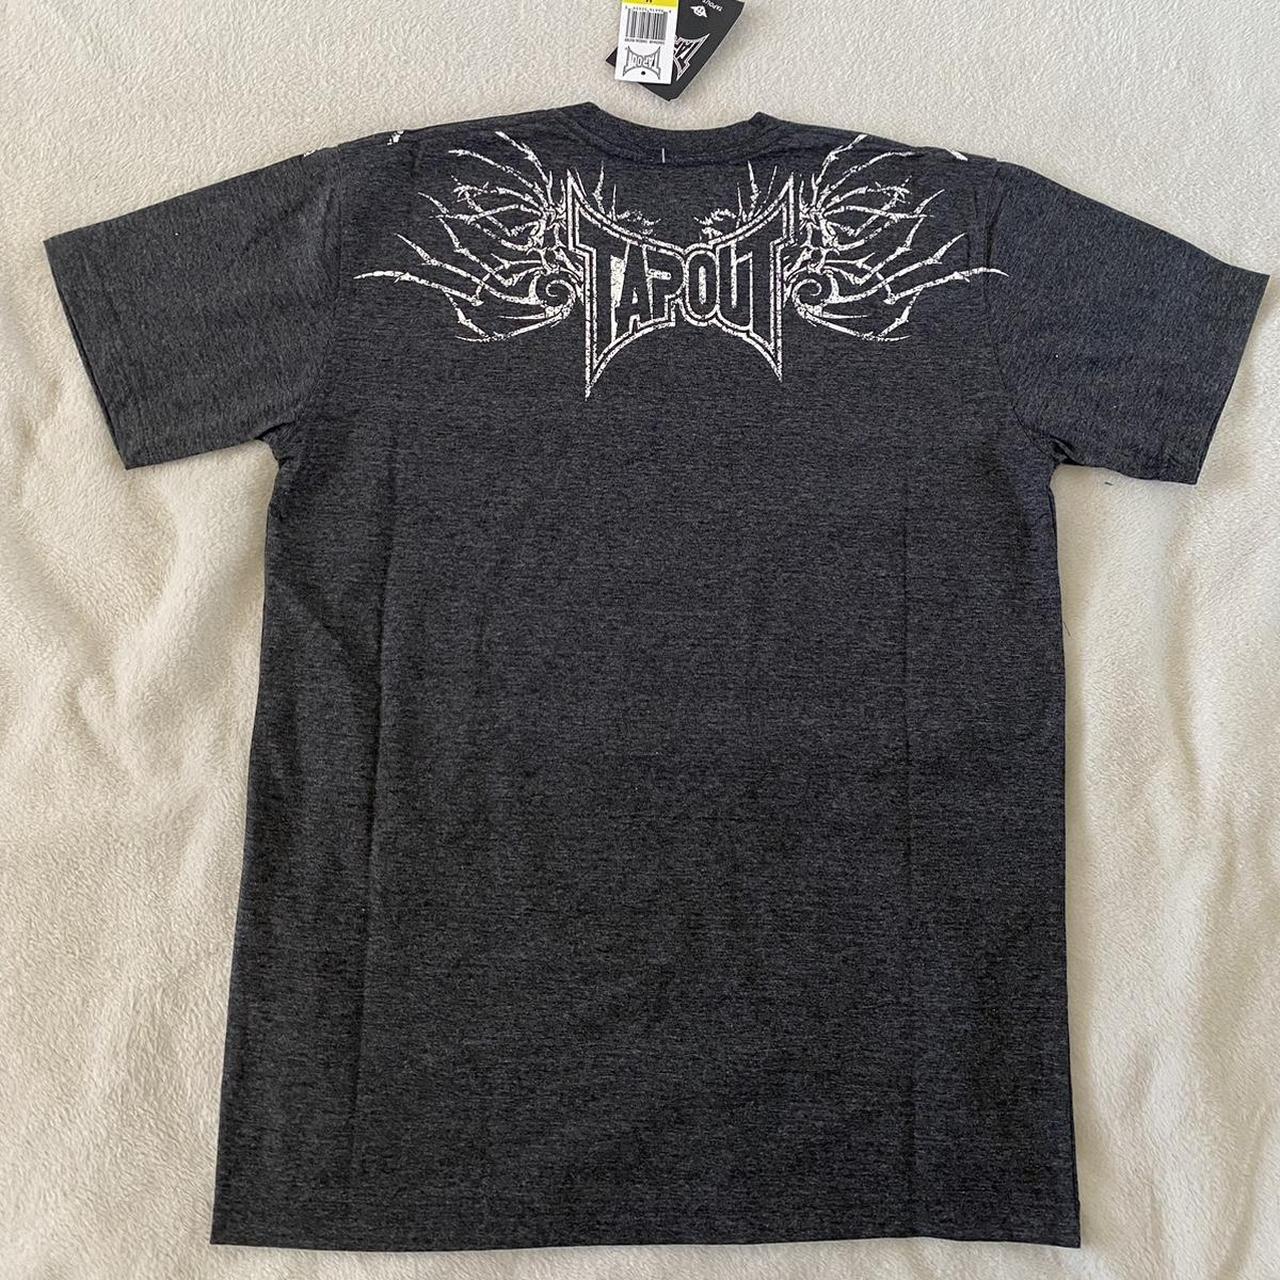 Double sided new with tag perfect condition tapout... - Depop